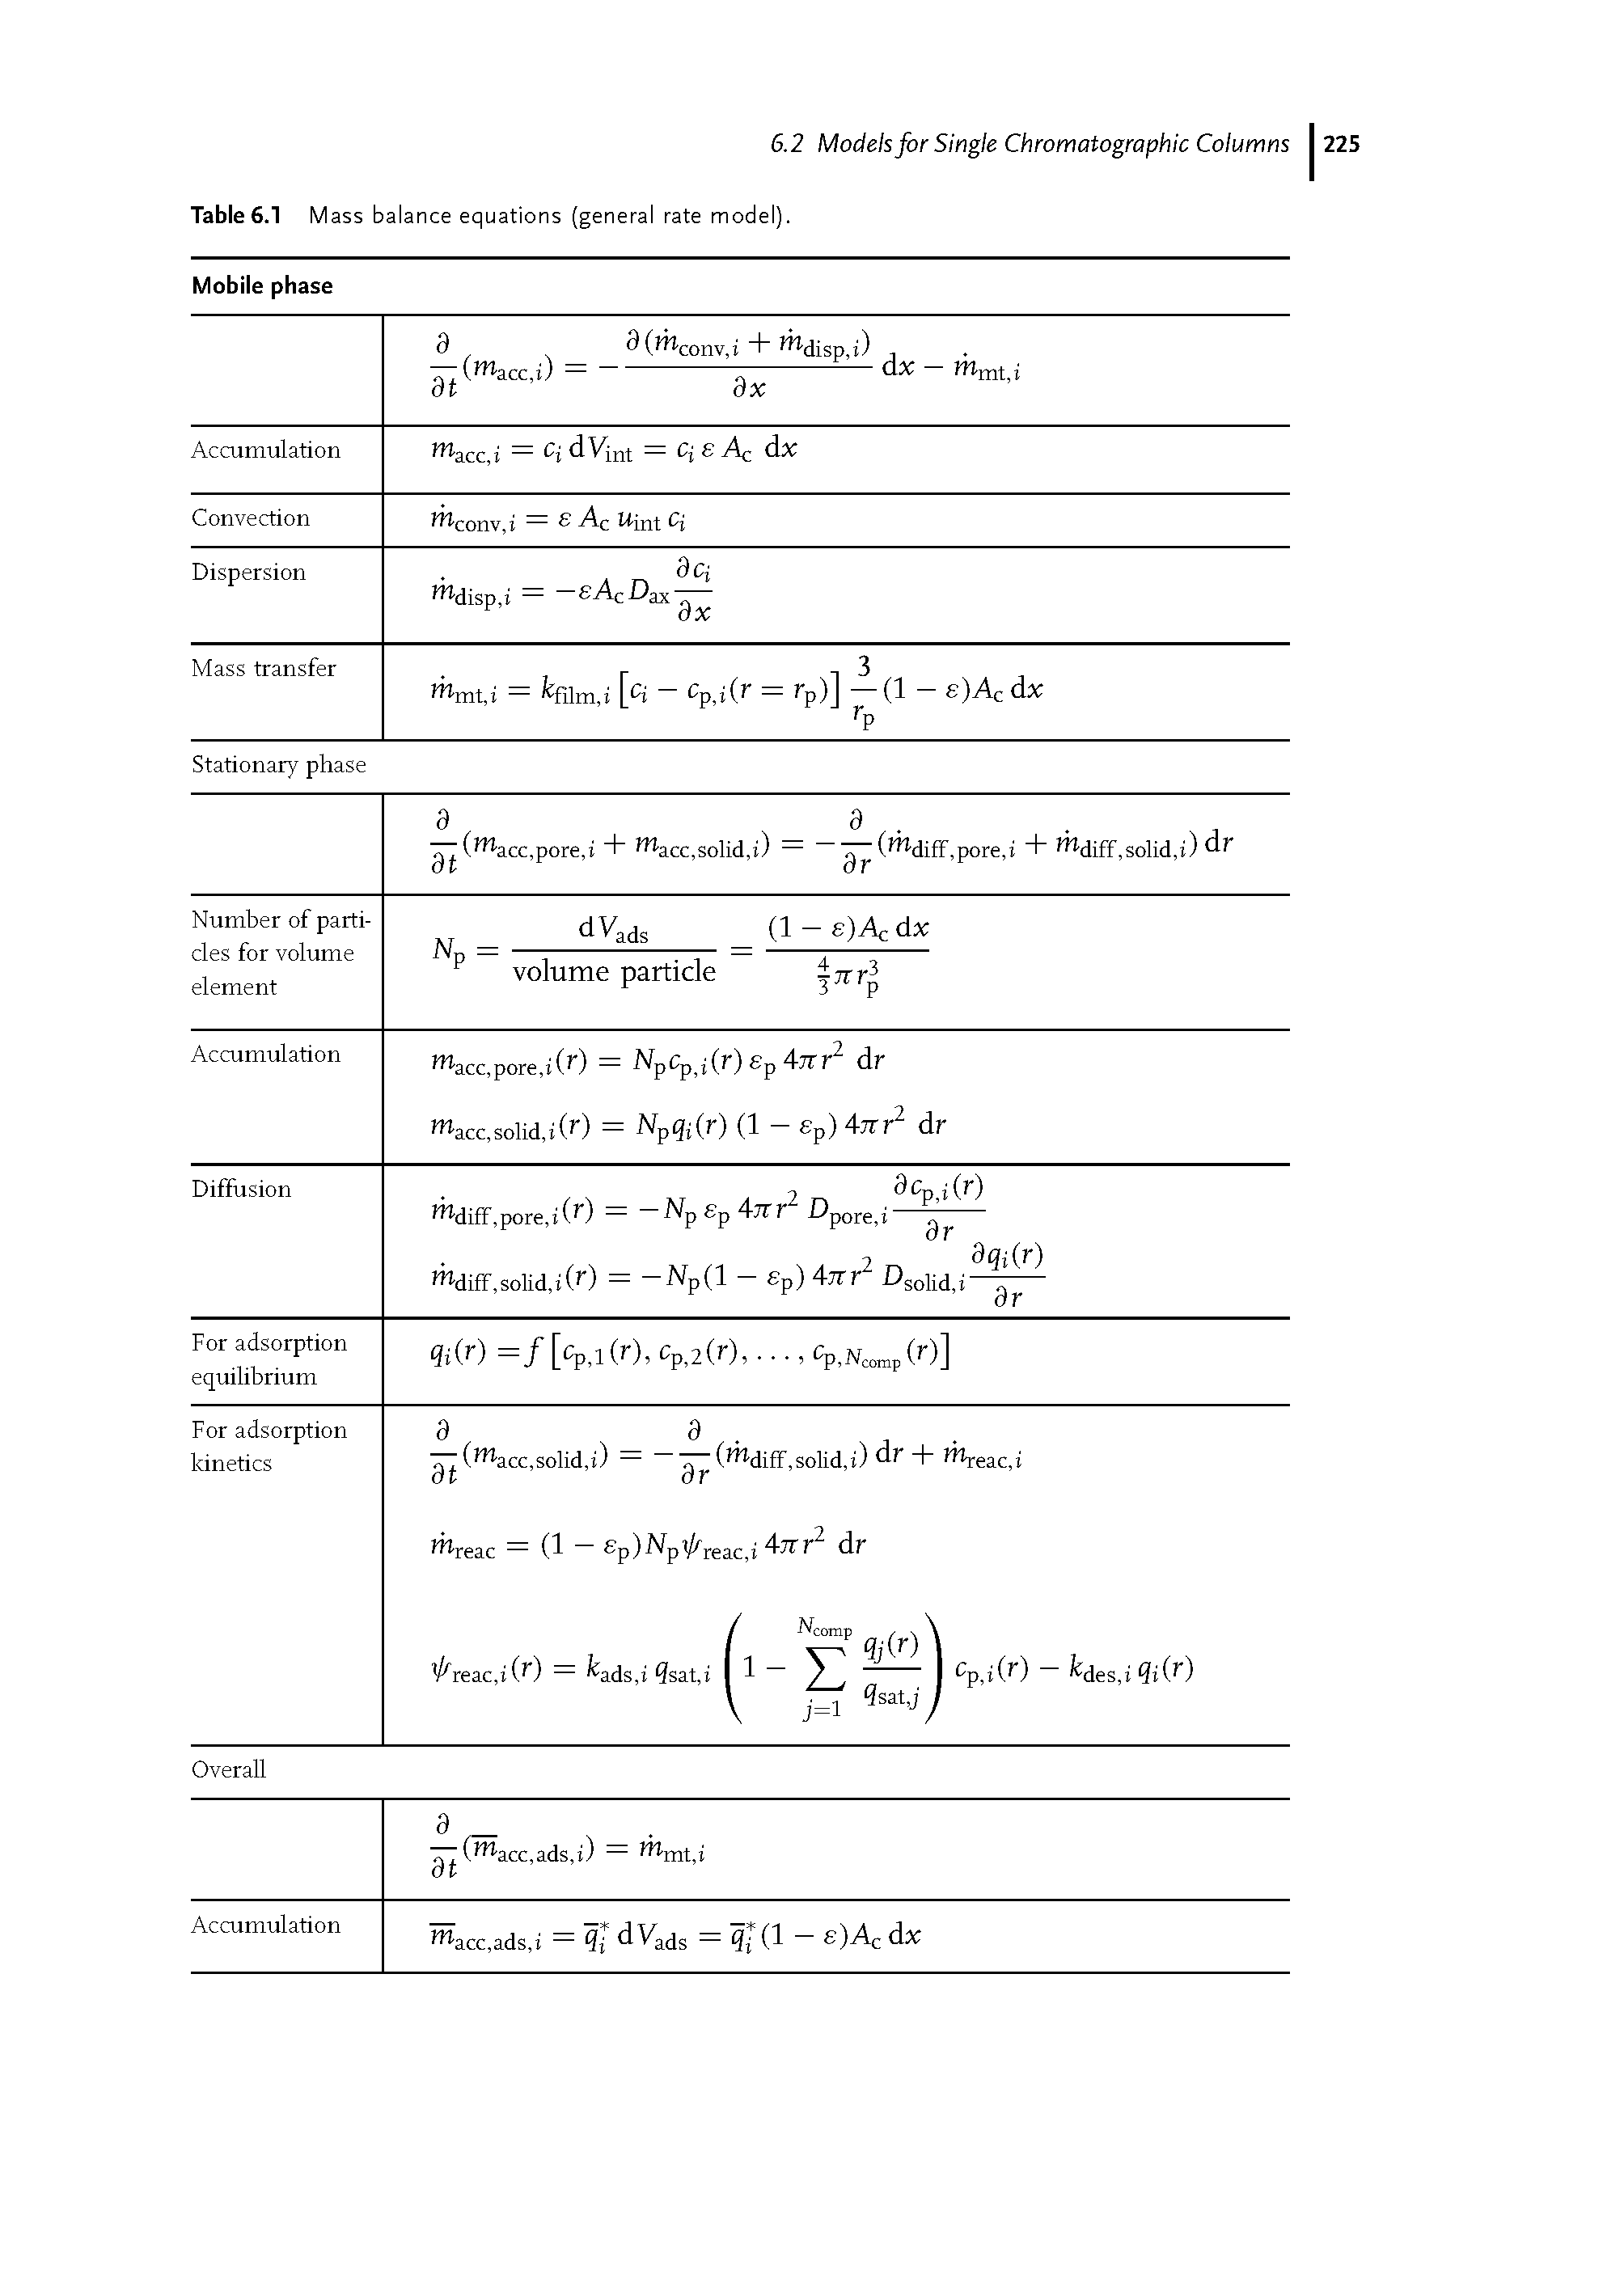 Table 6.1 M ass balance equations (general rate model).